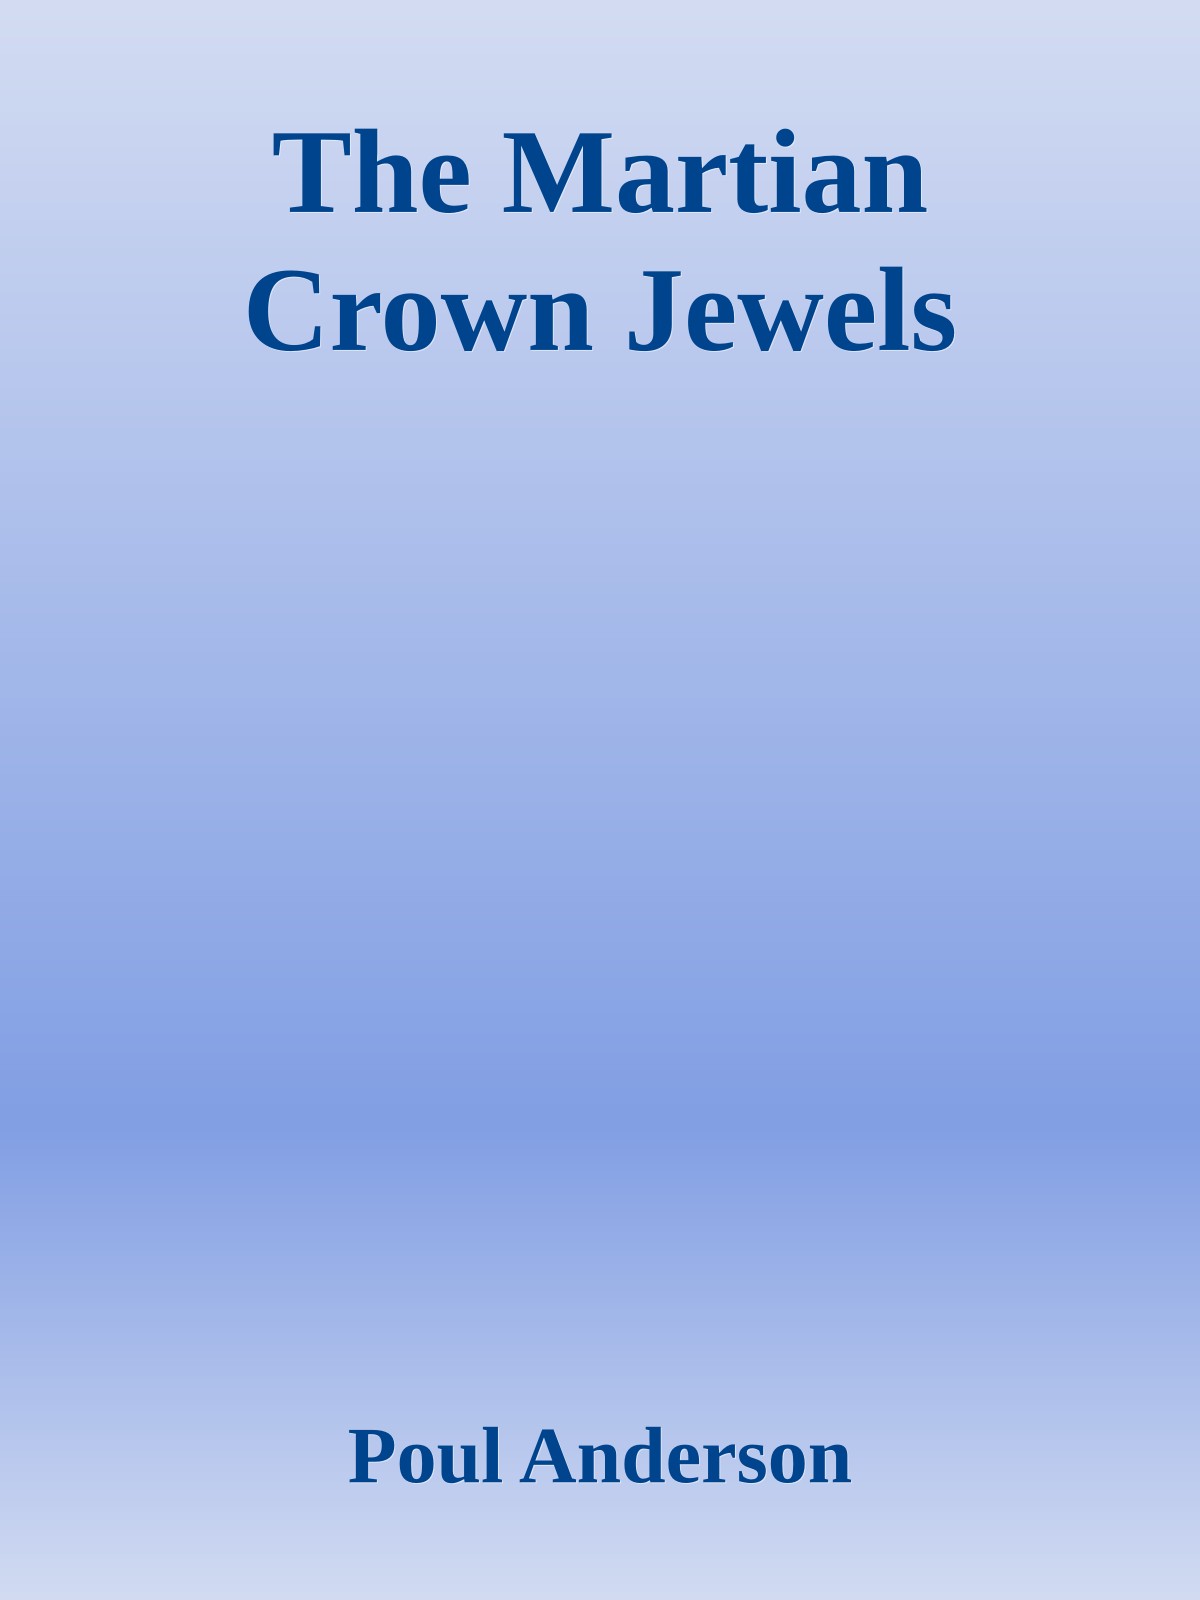 The Martian Crown Jewels